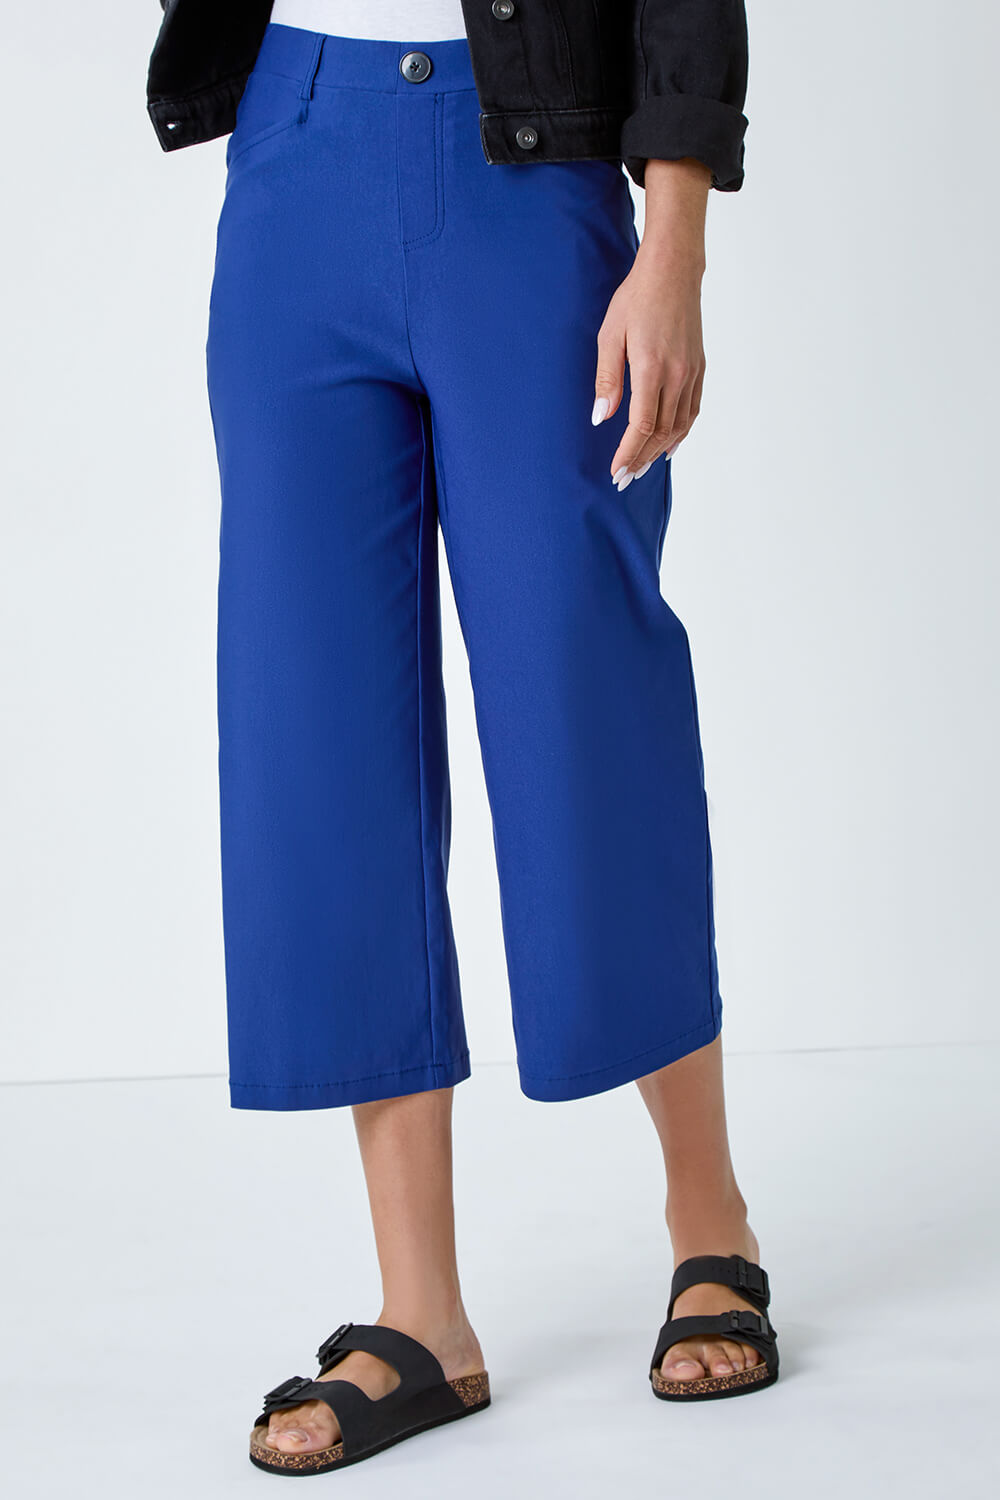 Midnight Blue Cropped Stretch Culotte, Image 4 of 5